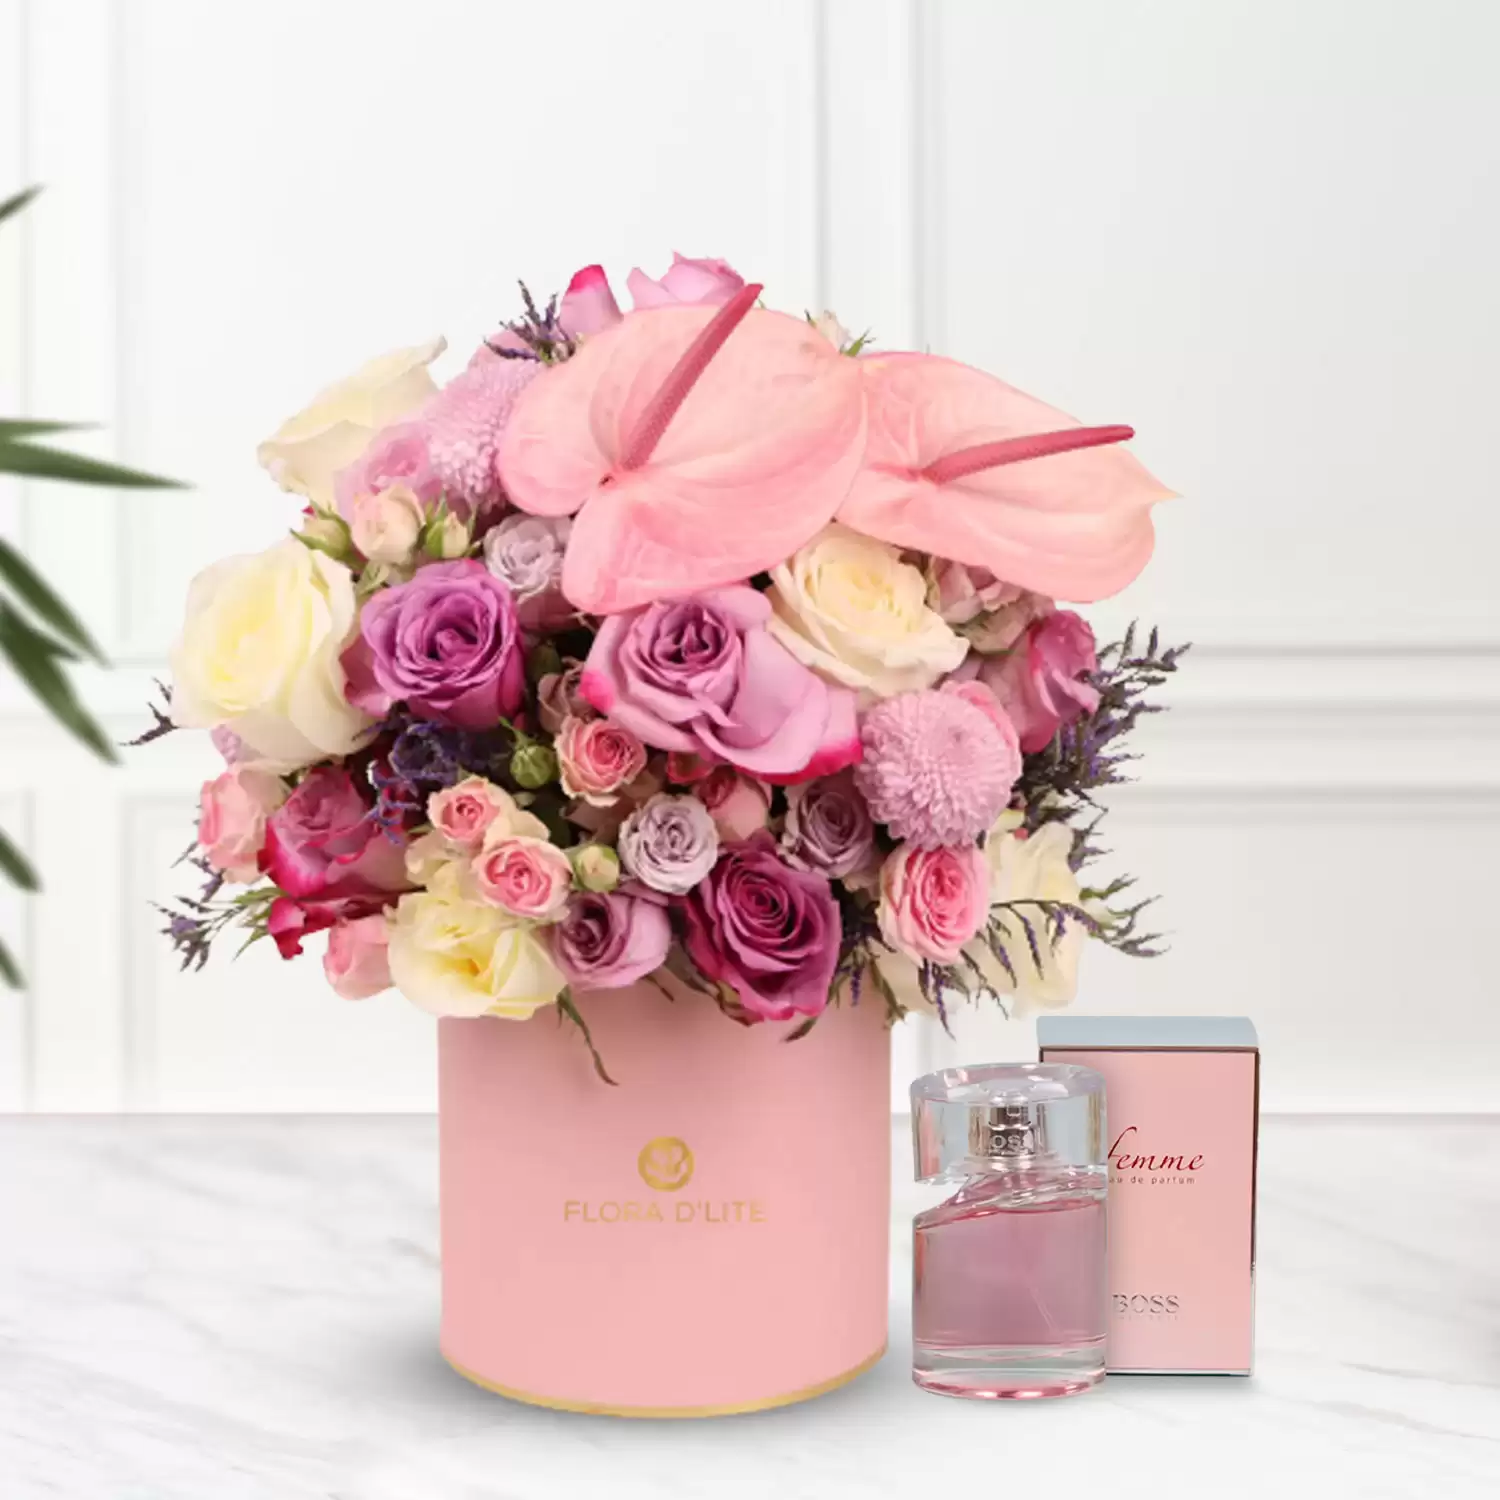 Pretty In Pink & Captivating Cologne